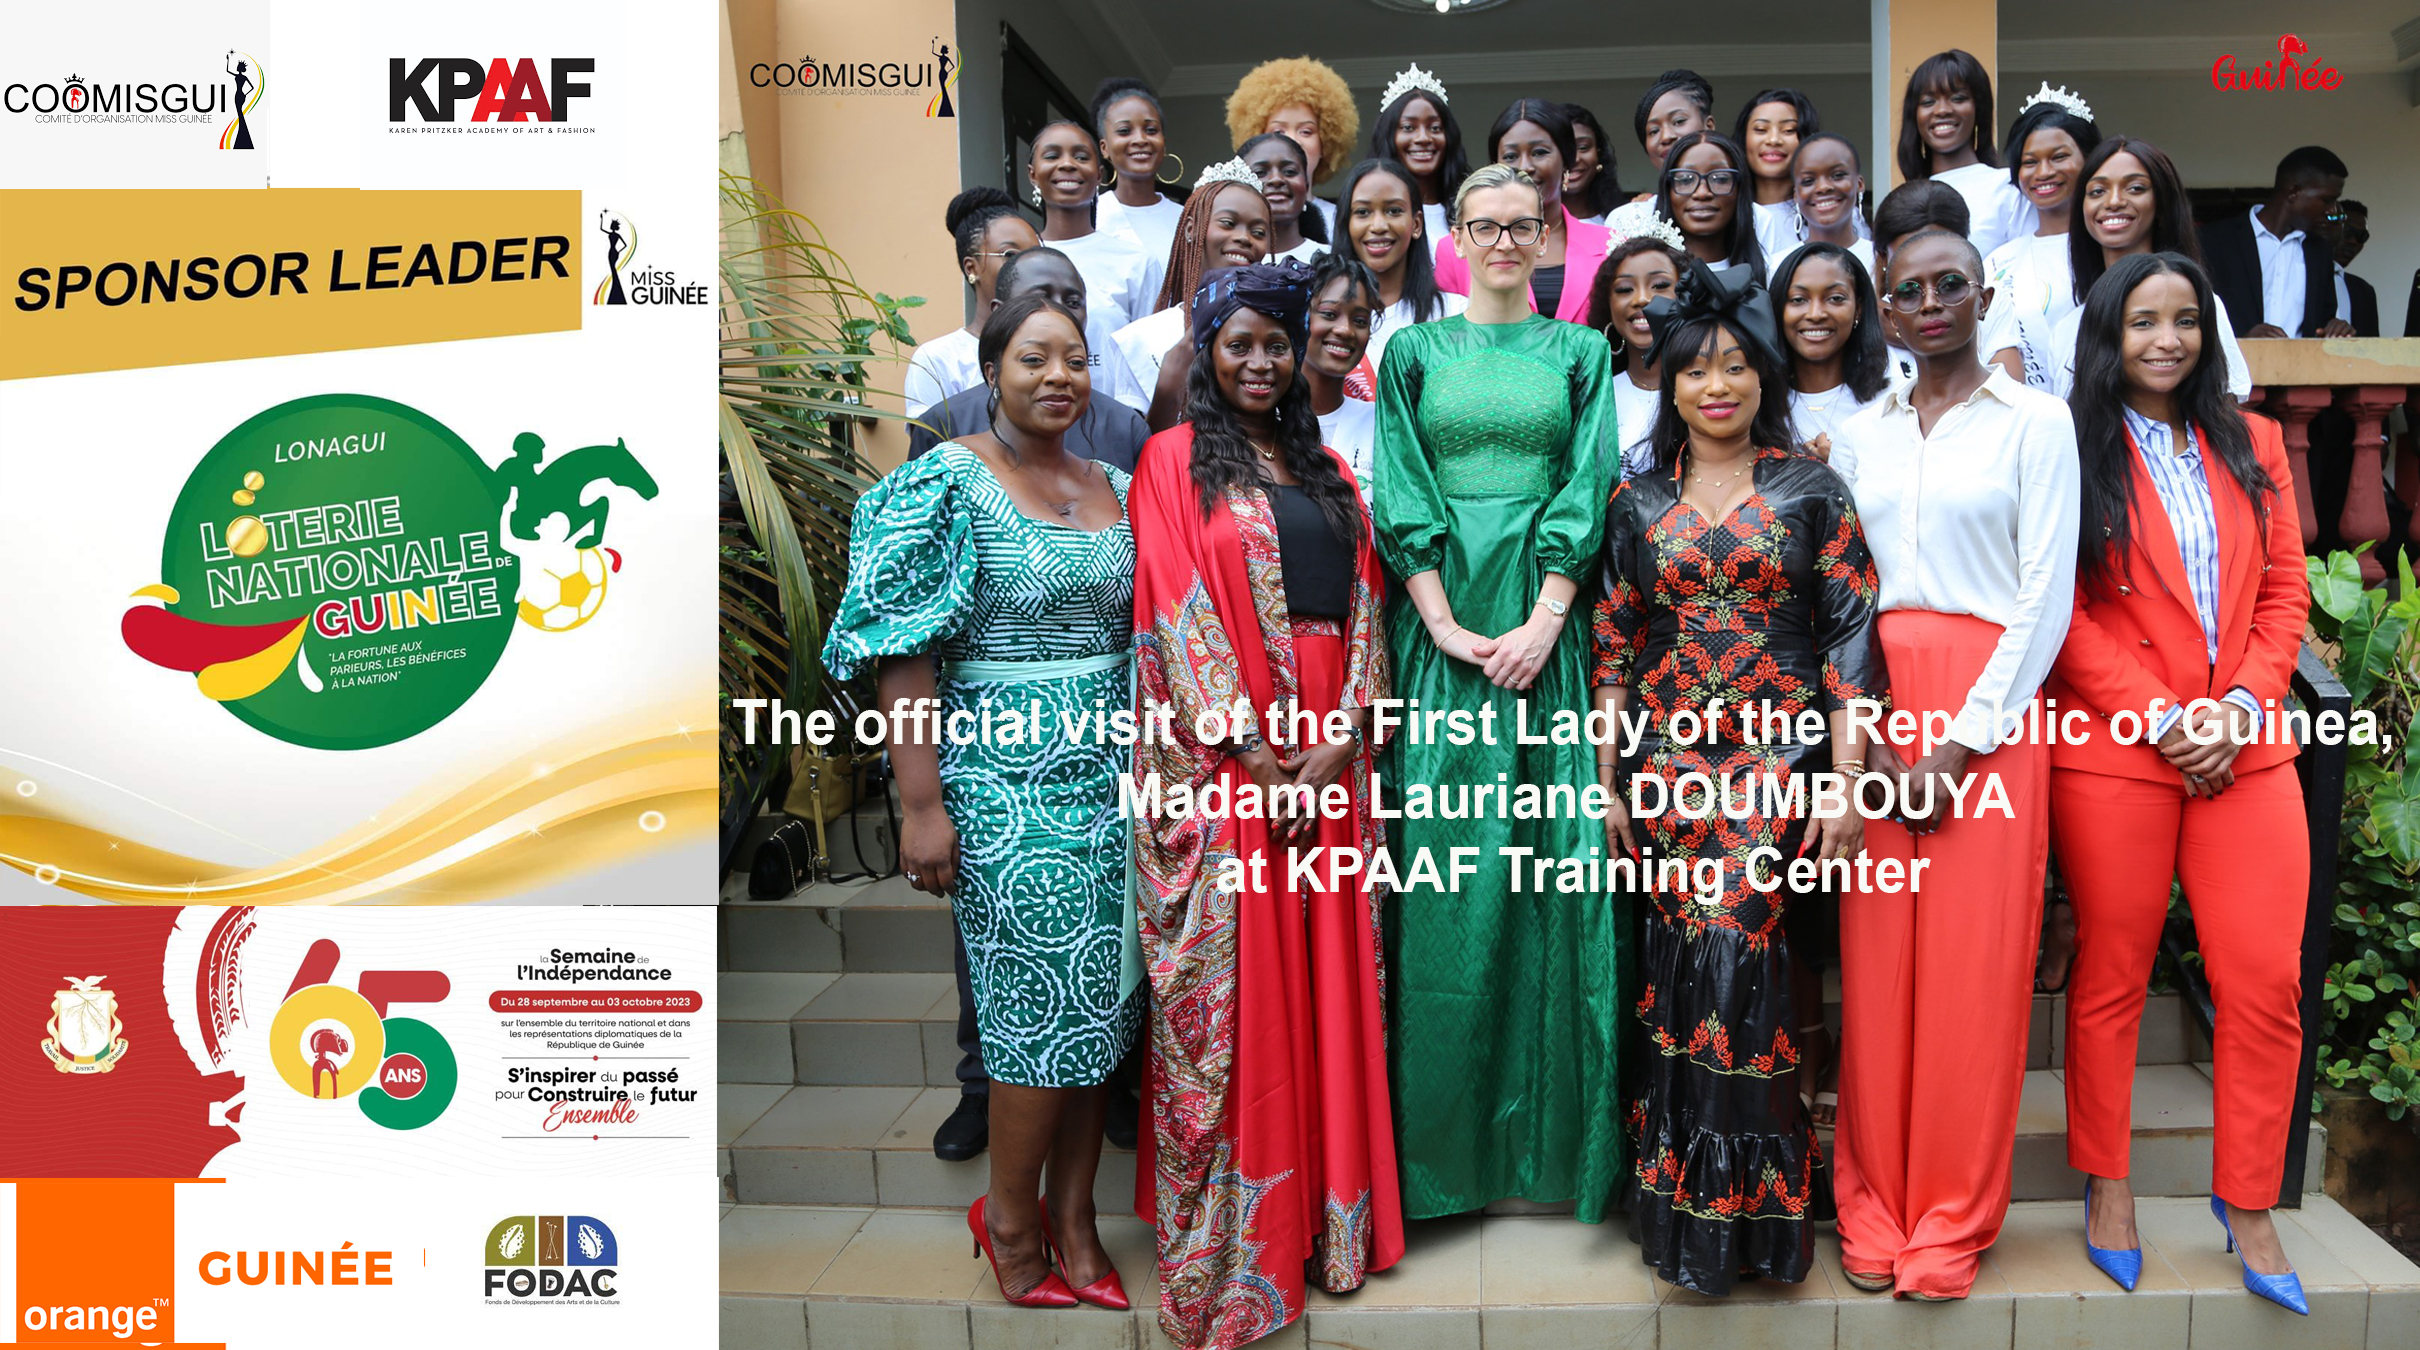 AFRICA-VOGUE-COVER-COOMISGUI-PRESENTS-The-official-visit-of-the-First-Lady-of-the-Republic-of-Guinea,-Madame-Lauriane-DOUMBOUYA-at-KPAAF-Training-Center-DN-AFRICA-Media-Partner